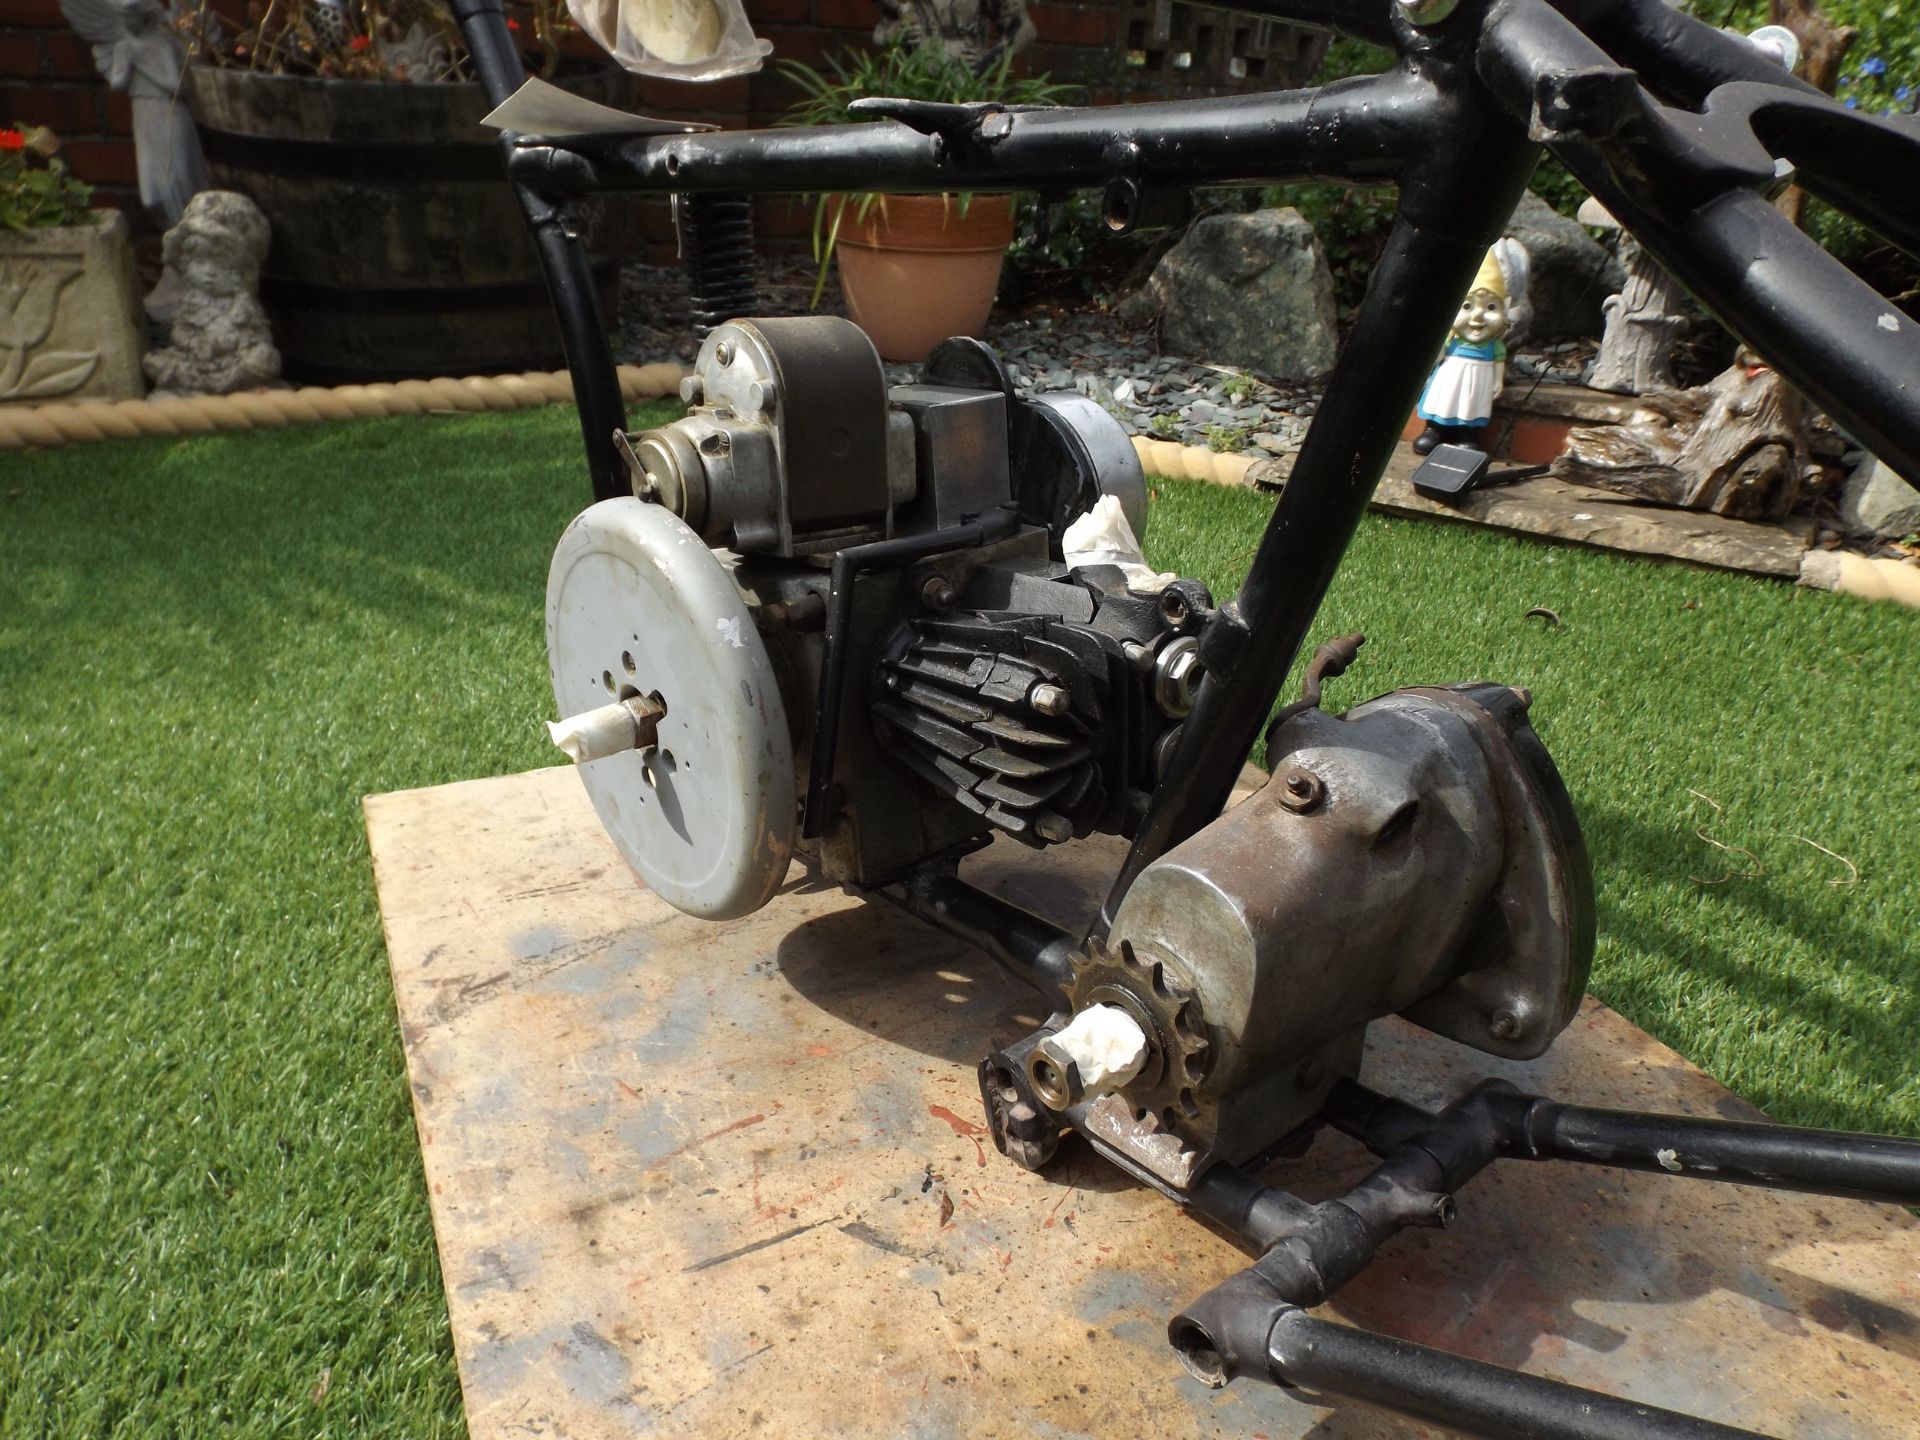 1932 Douglas TS frame With an engine, gearbox, clutch and a magneto (£500 rebuild)